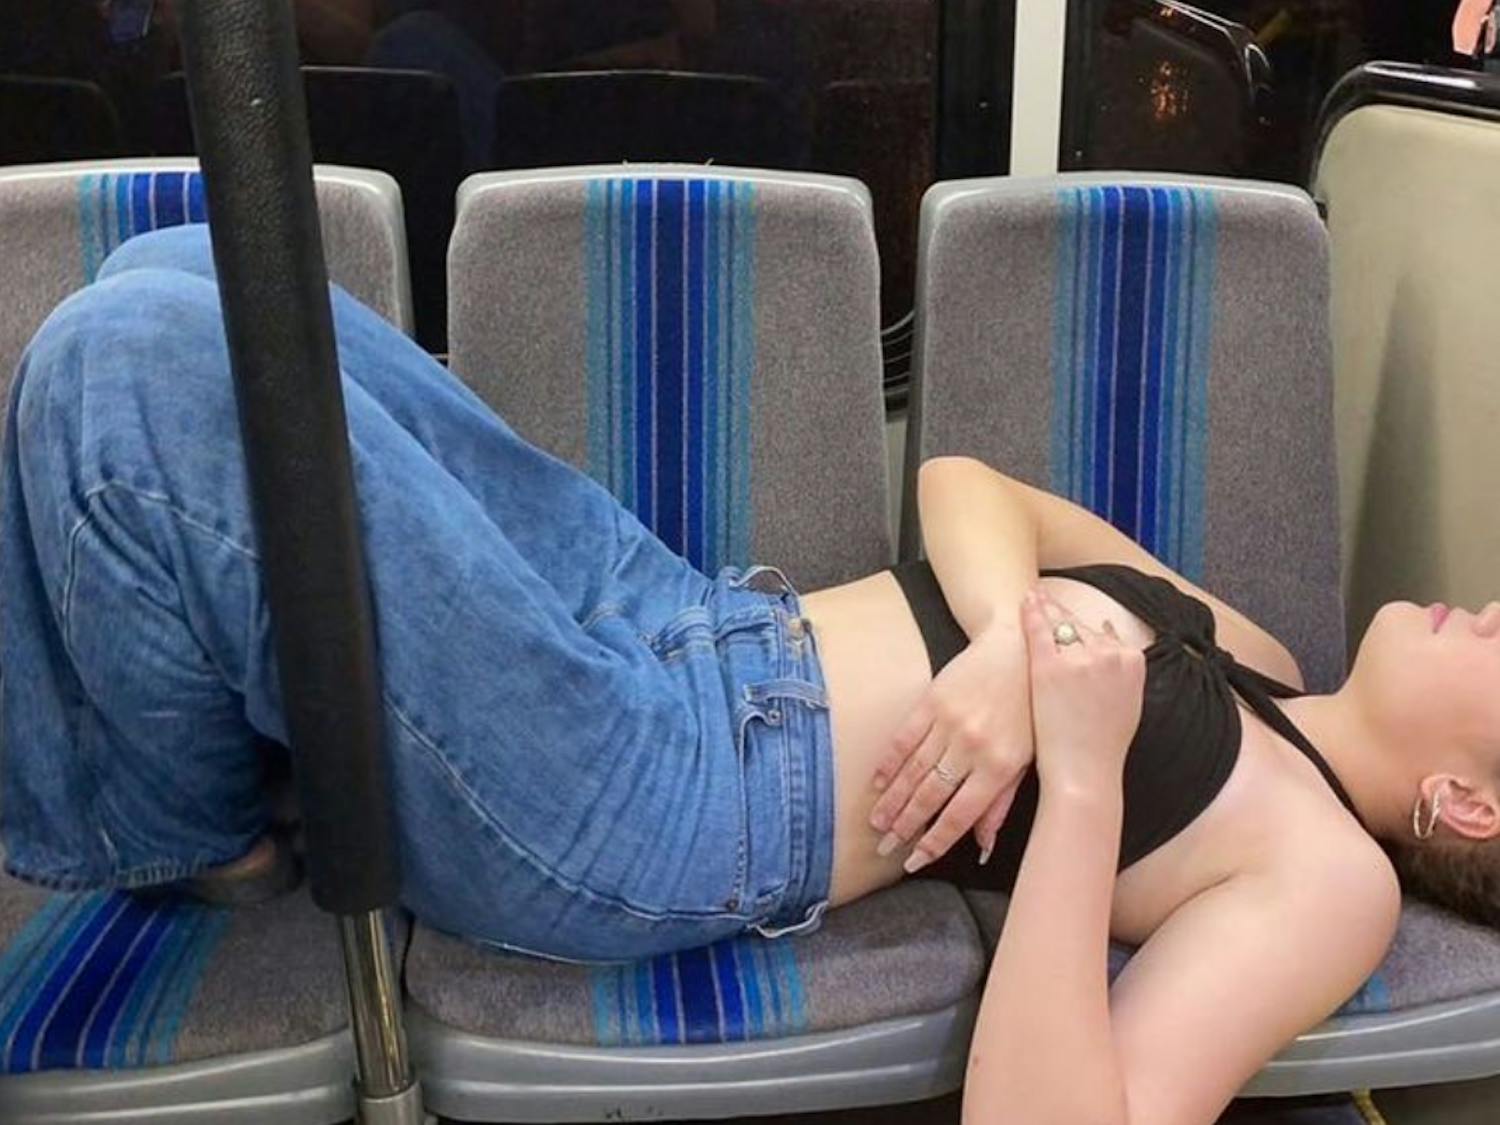 A photo of Nicole Oliva passed out on the Stampede bus landed on the @uboutcold Instagram account.